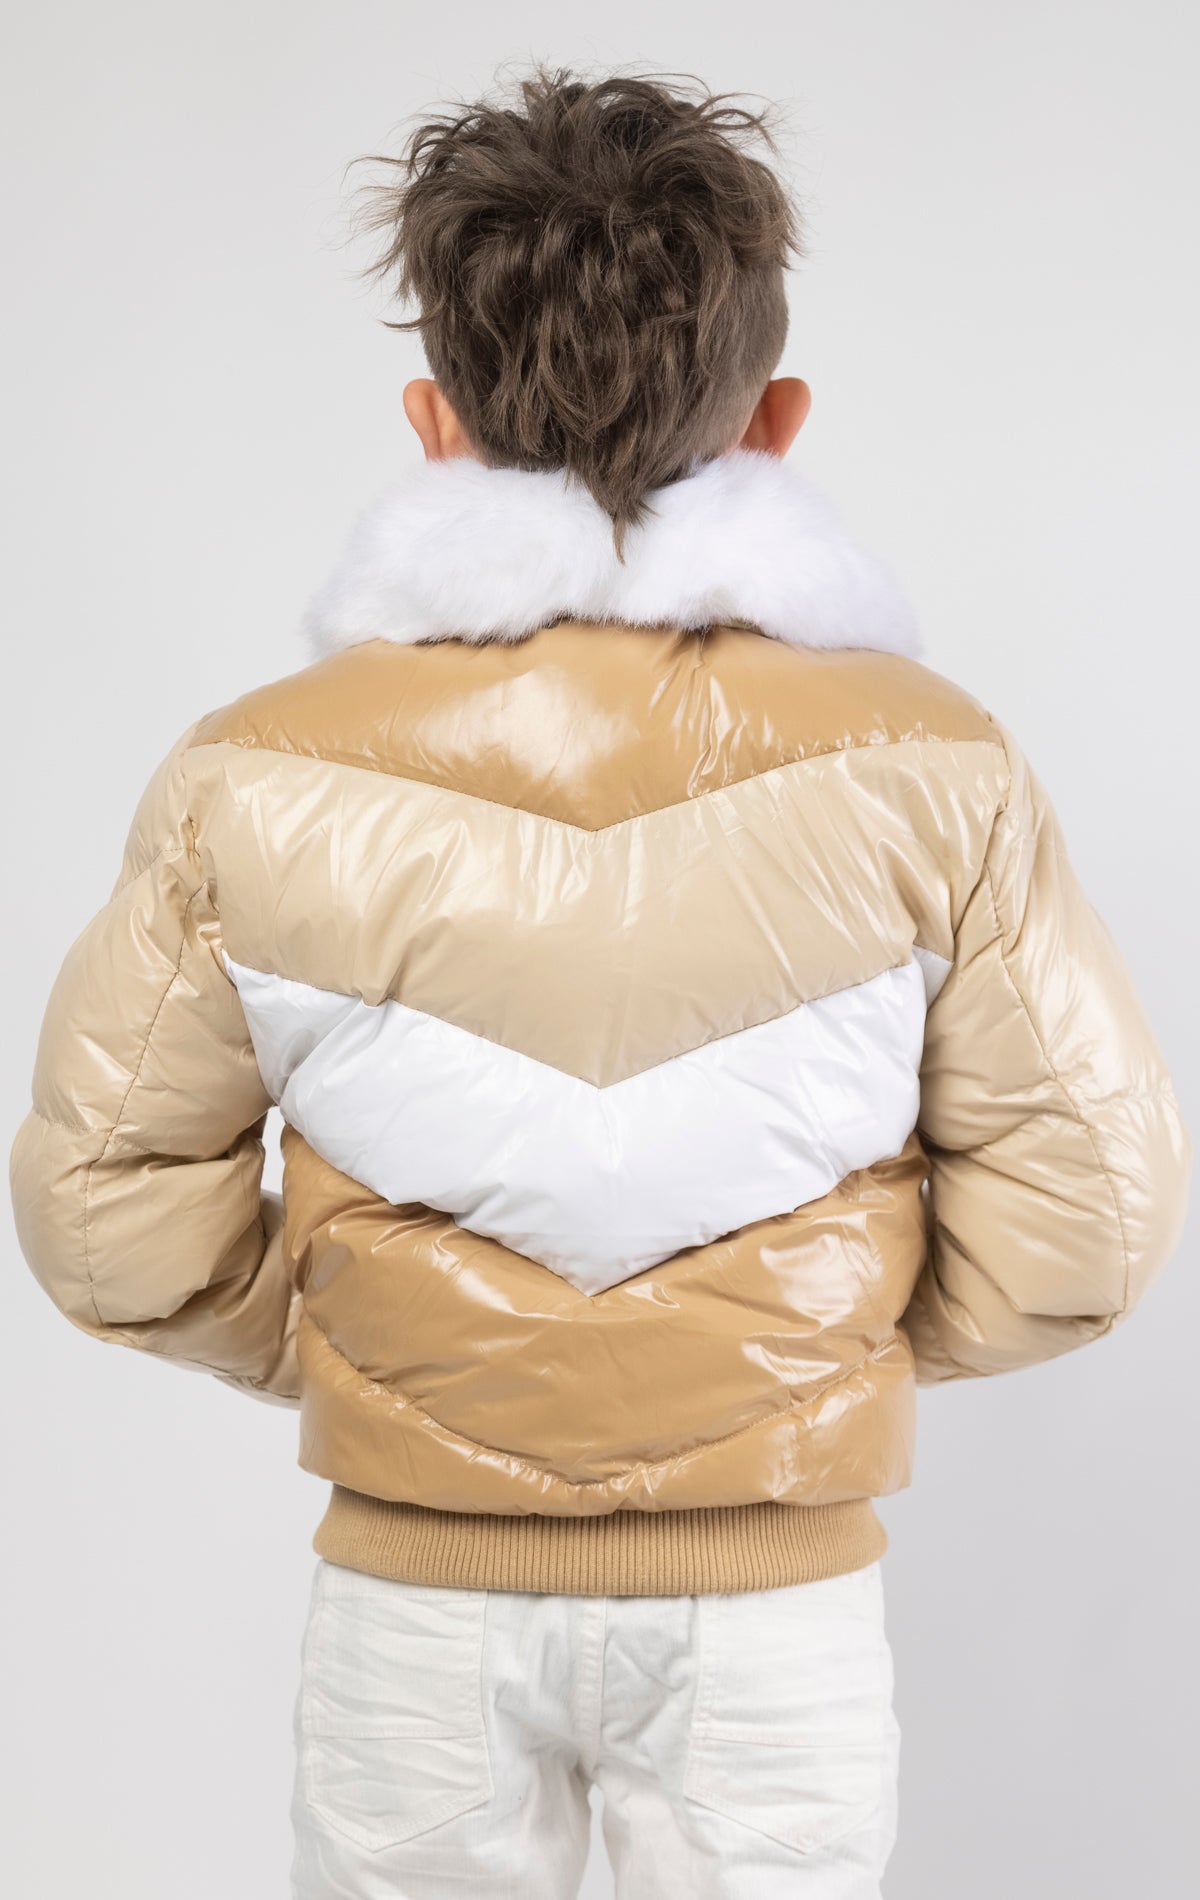 This kids' puffer jacket features a 100% nylon laqué shell, quilted padding, and 100% polyester lining. It also includes branded Jordan Craig zippers, dual side pockets with zipper closure, and a removable faux jackal fur collar.